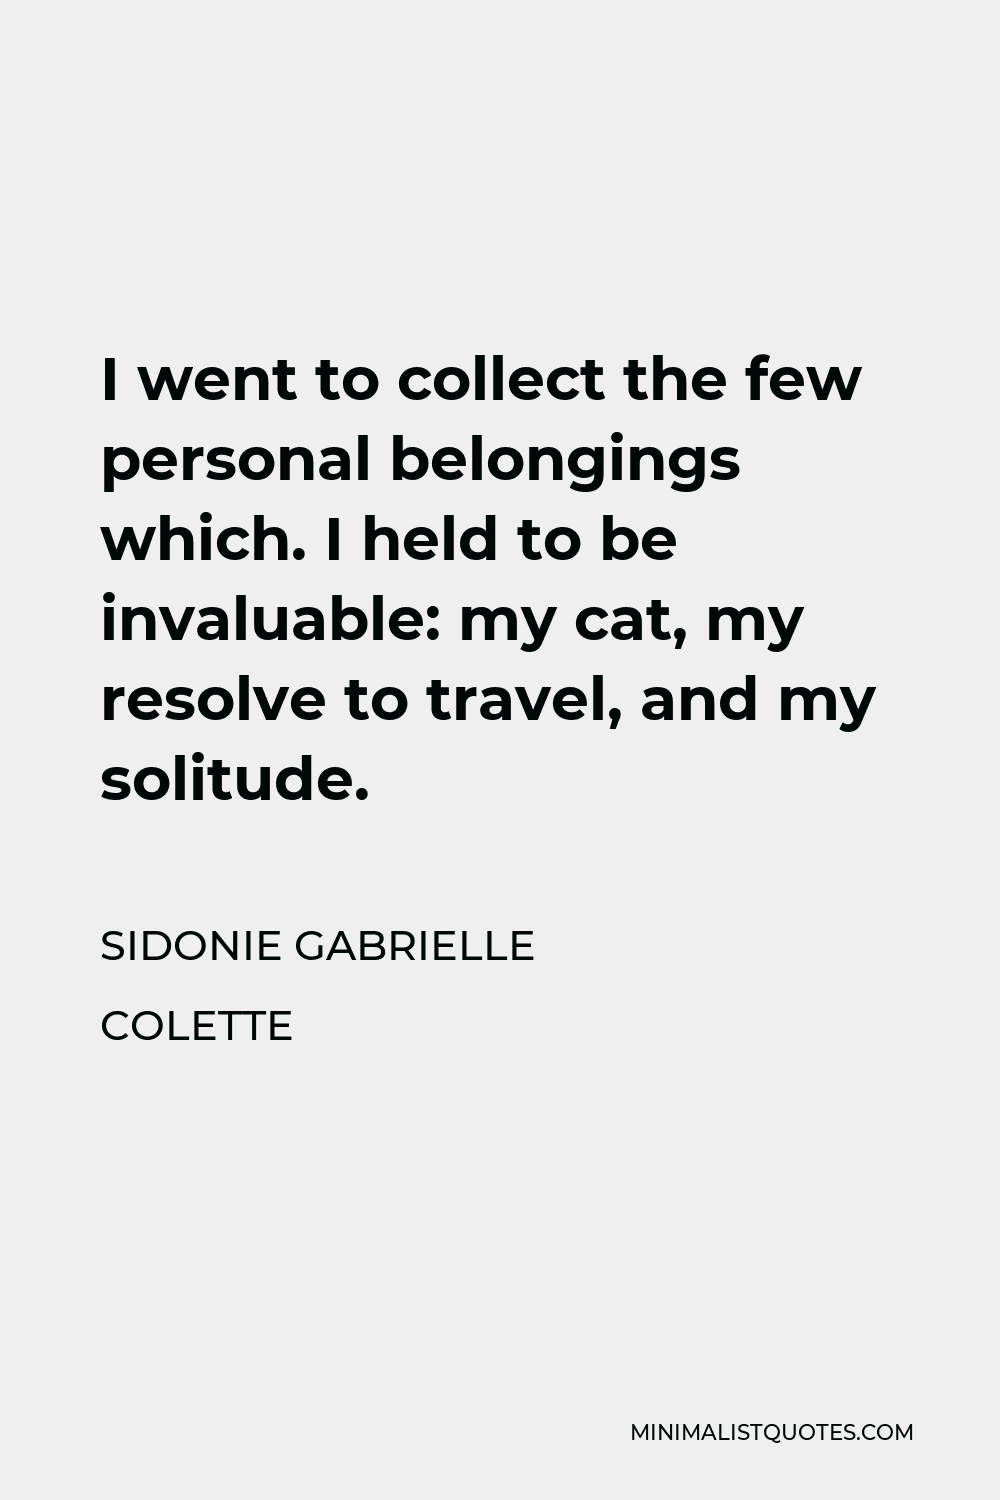 Sidonie Gabrielle Colette Quote - I went to collect the few personal belongings which. I held to be invaluable: my cat, my resolve to travel, and my solitude.